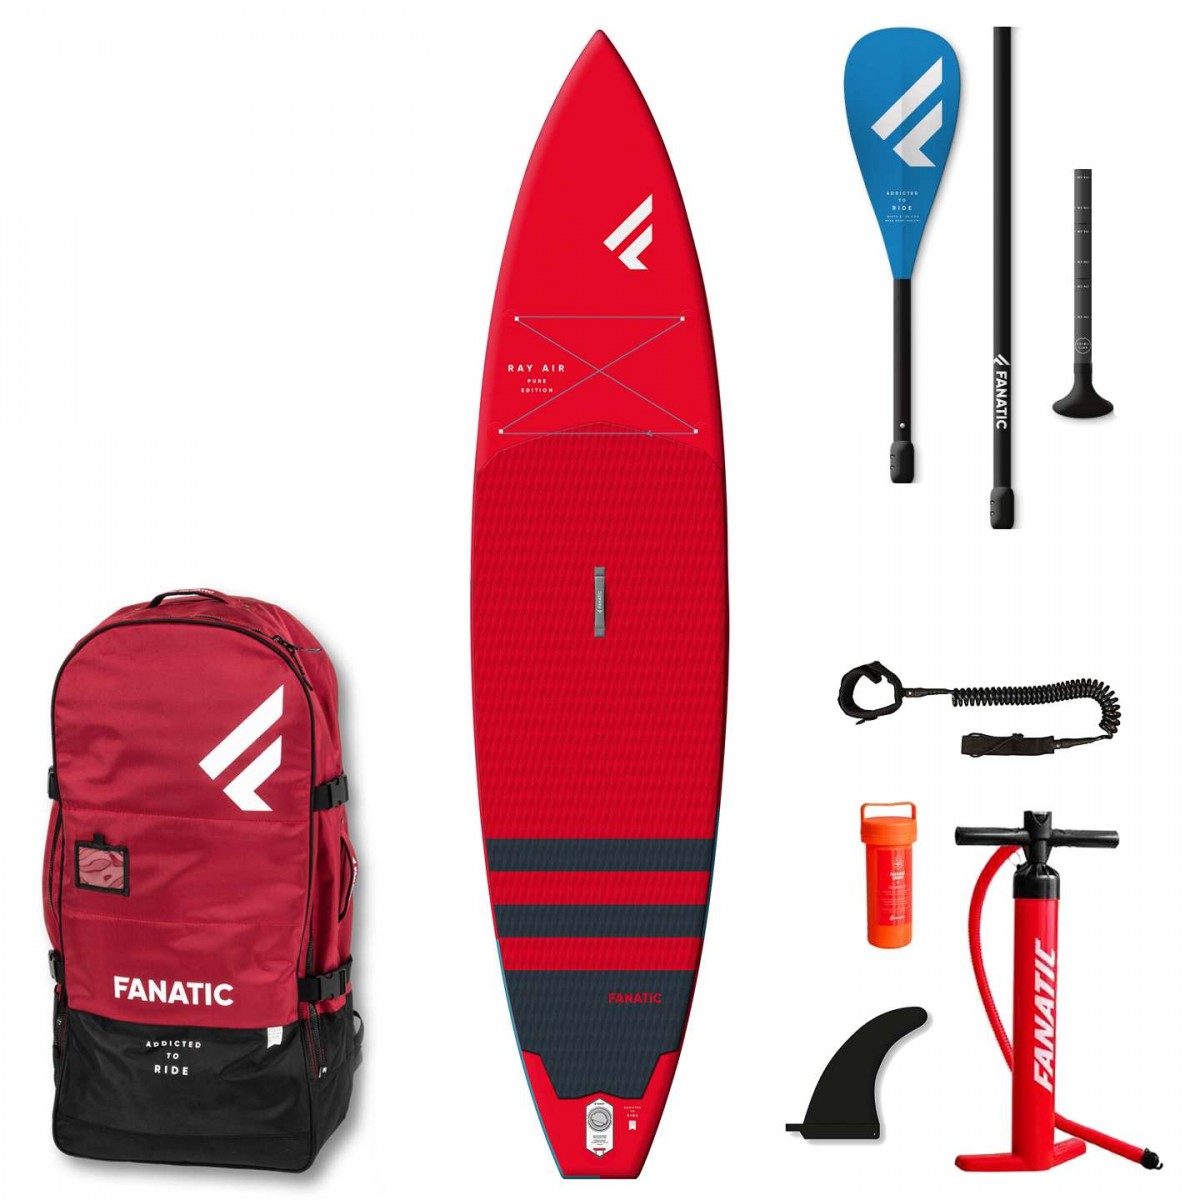 Fanatic Ray air pure 11’6 RED package